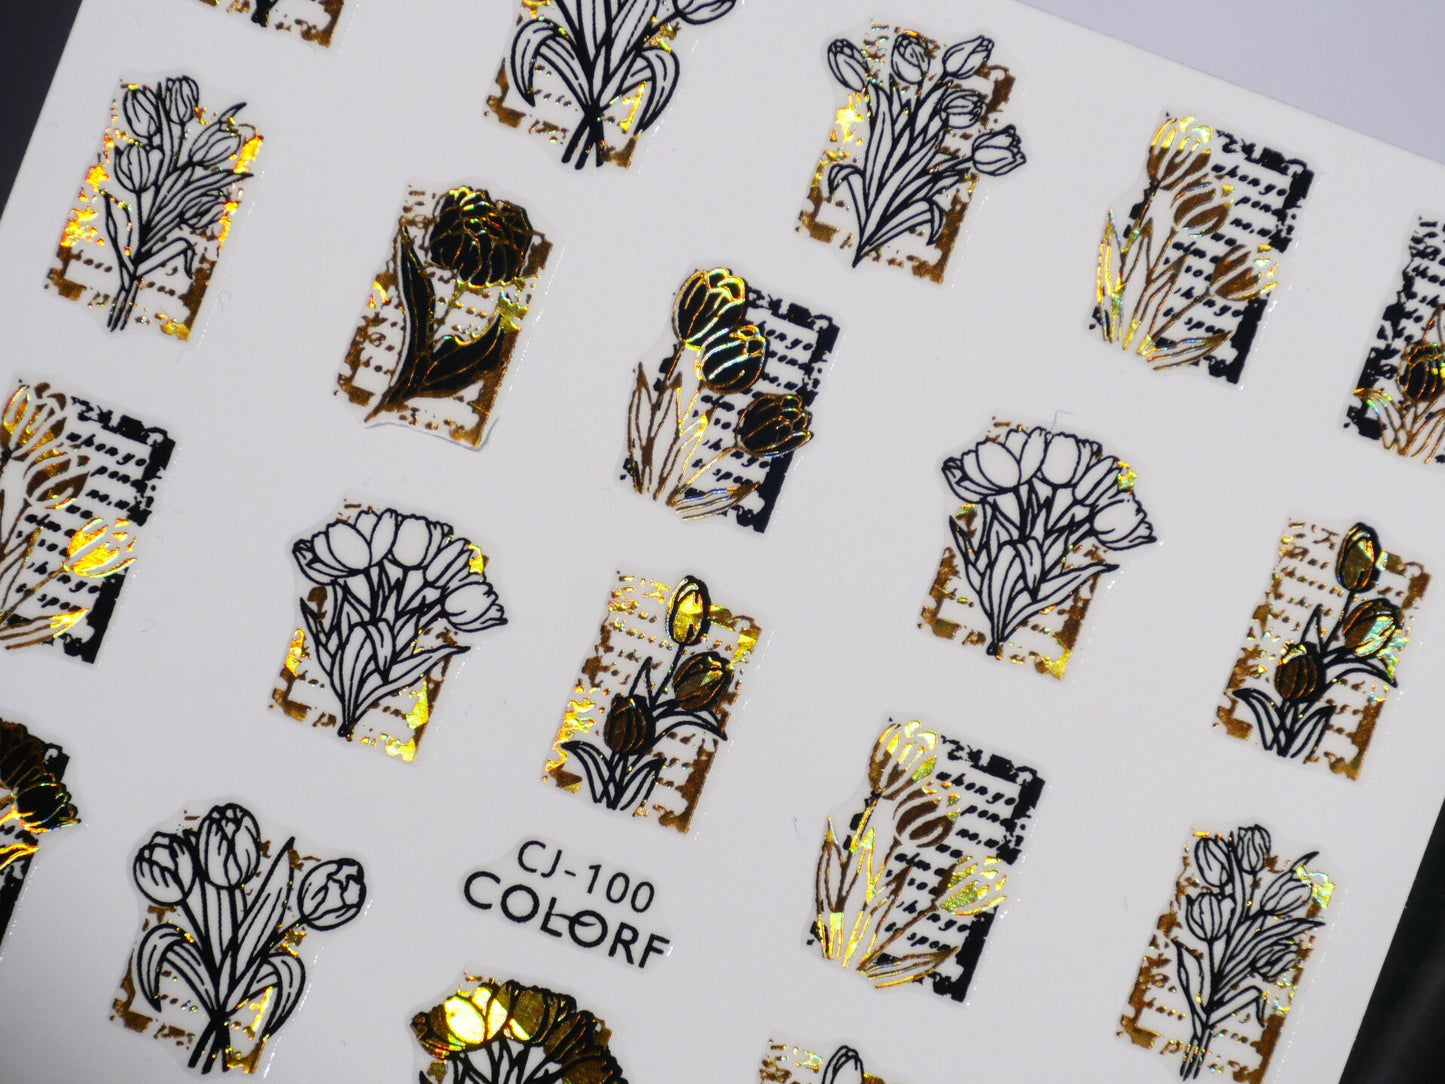 Flower Halo Gold Framed Nail Sticker/ Iridescent Tulip Floral Nail Art Stickers Self Adhesive Decals/ Black White Peel off sticker Manicure